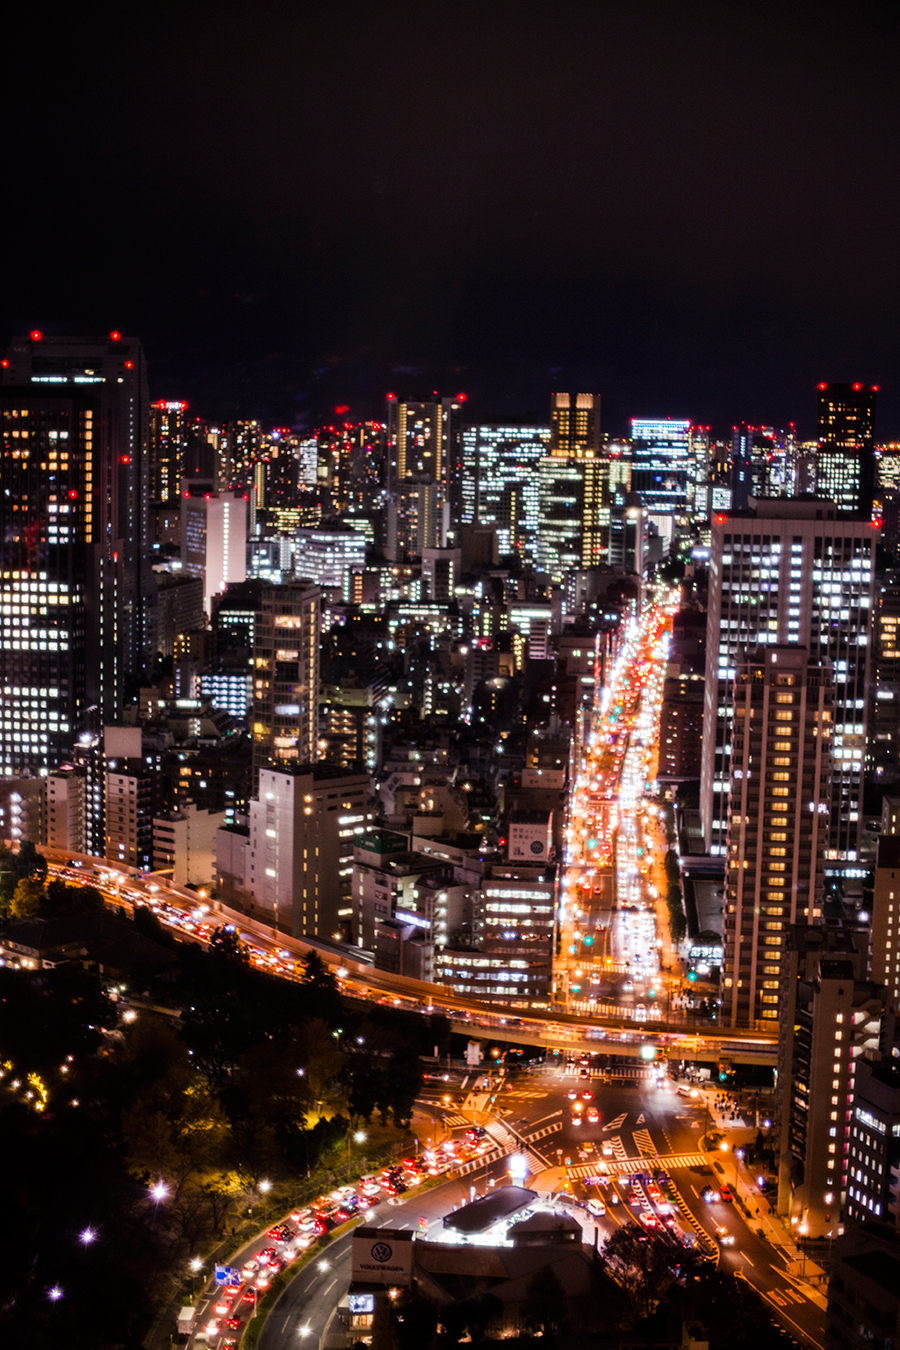 Busy roads in the night cityscape from the Tokyo Tower Observatory.